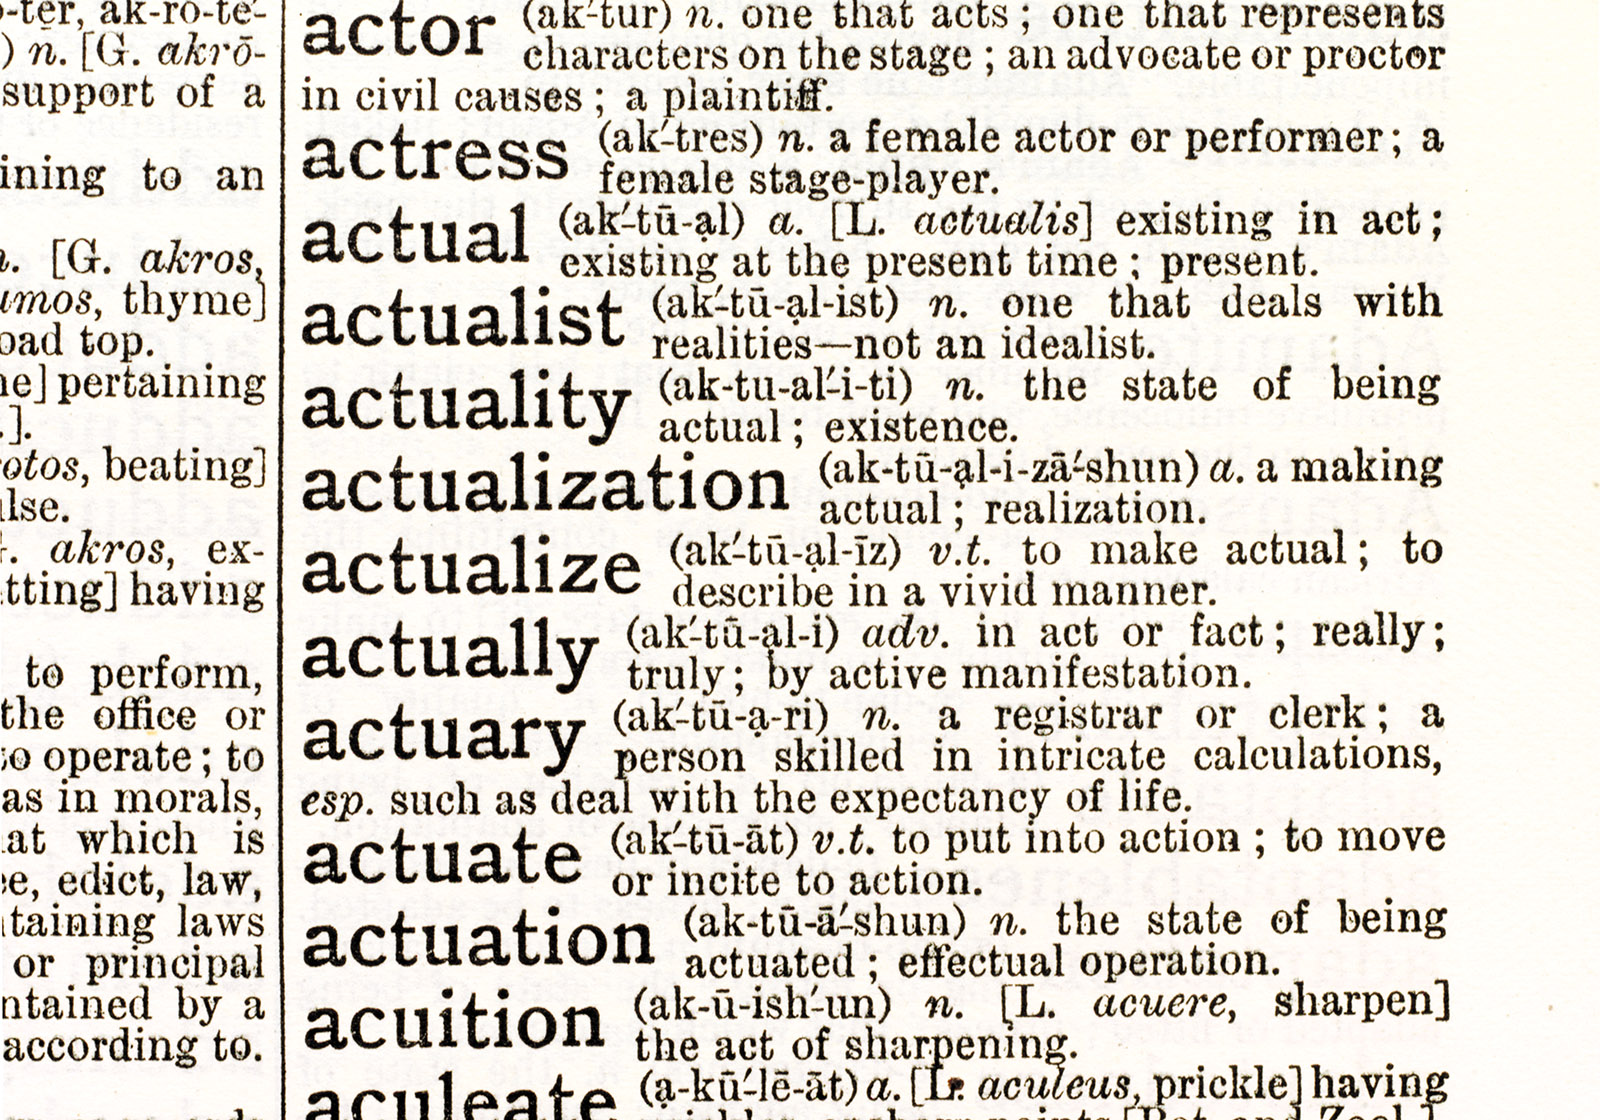 Collins Graphical Dictionary, 1890s, detail